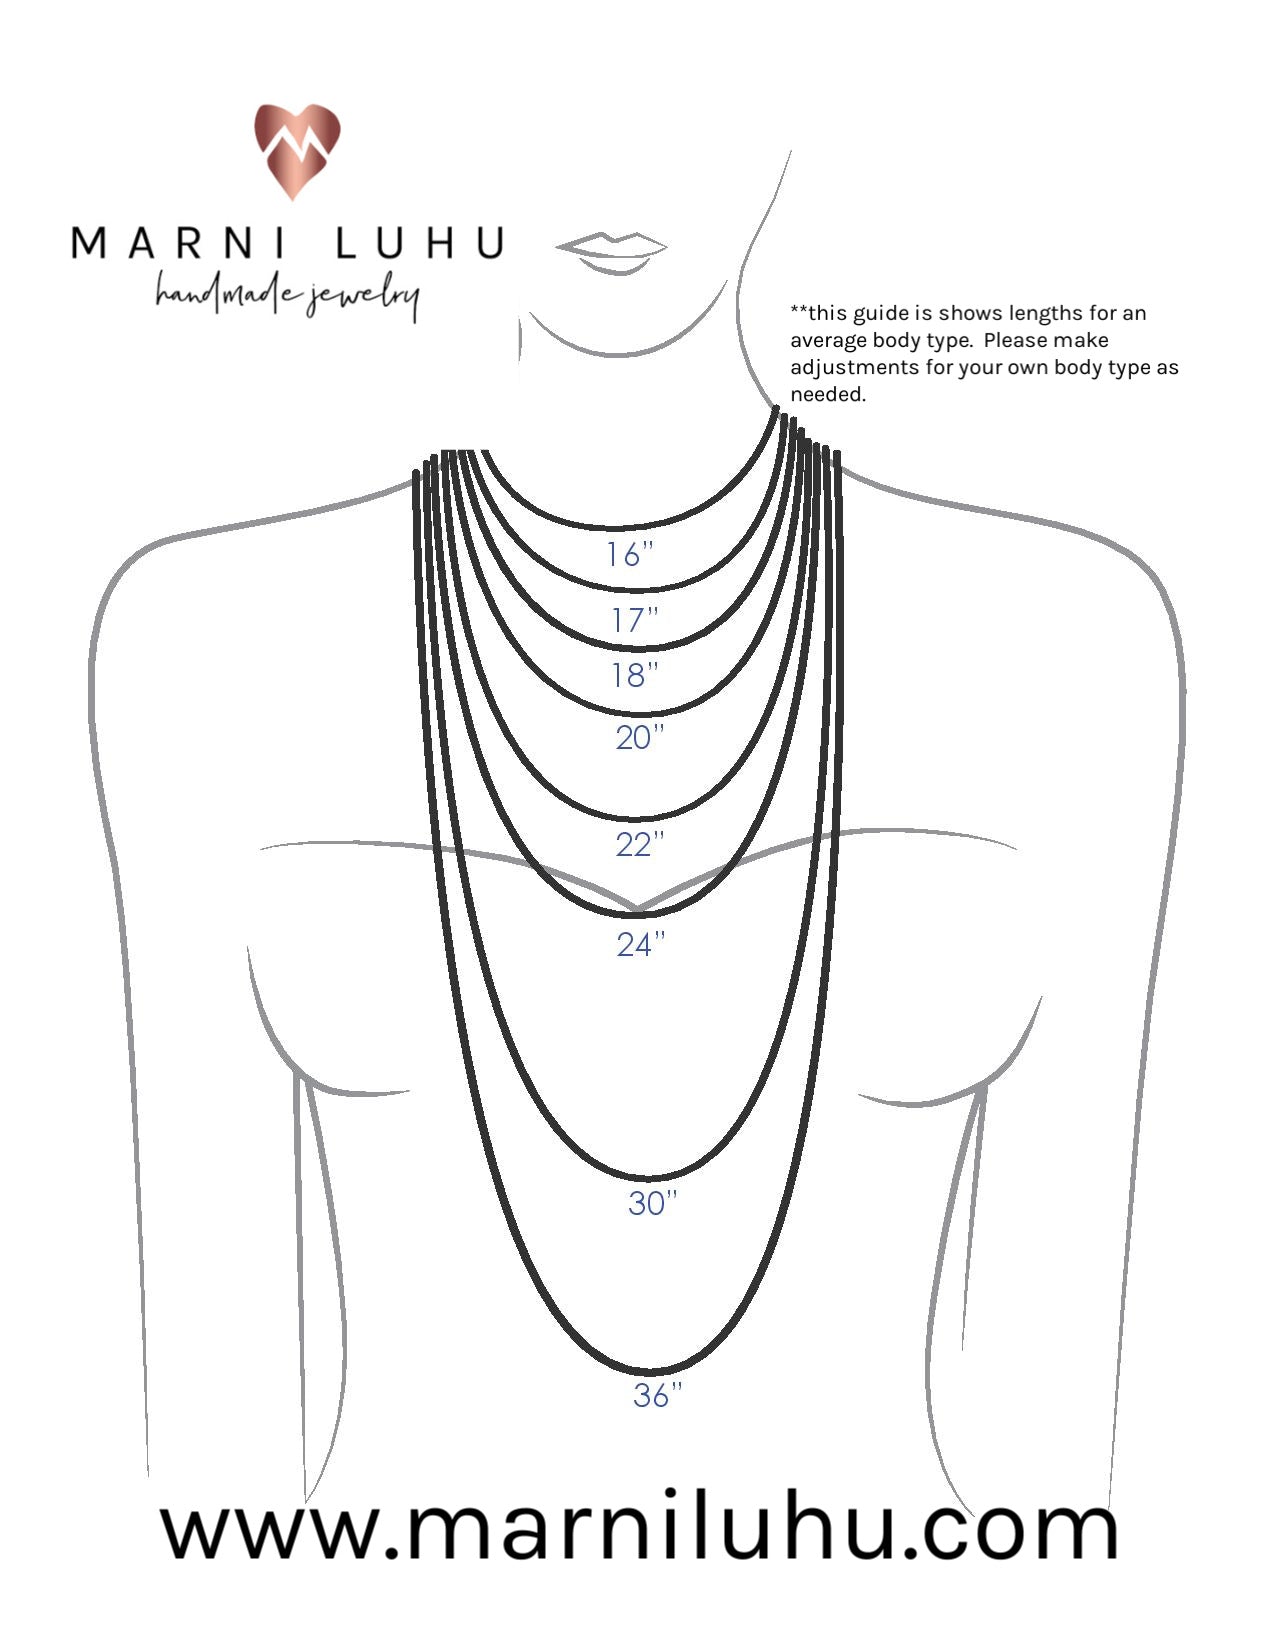 Marni LuHu Chain length guide for women.  Chains from 16"-36"